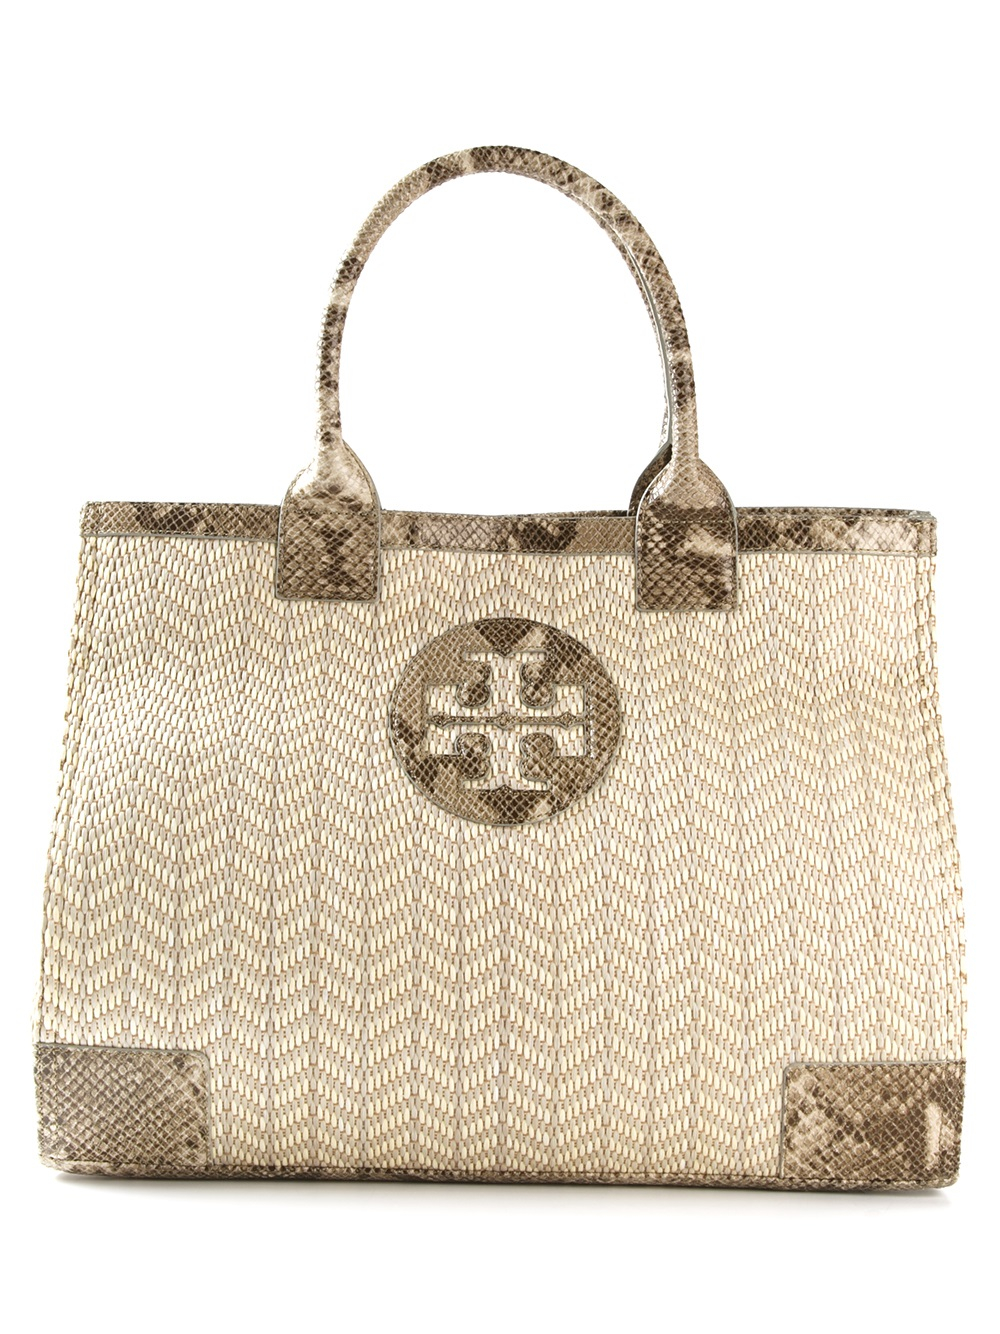 Lyst - Tory Burch Ella Snake-Effect Leather-Trimmed Raffia Tote in Natural